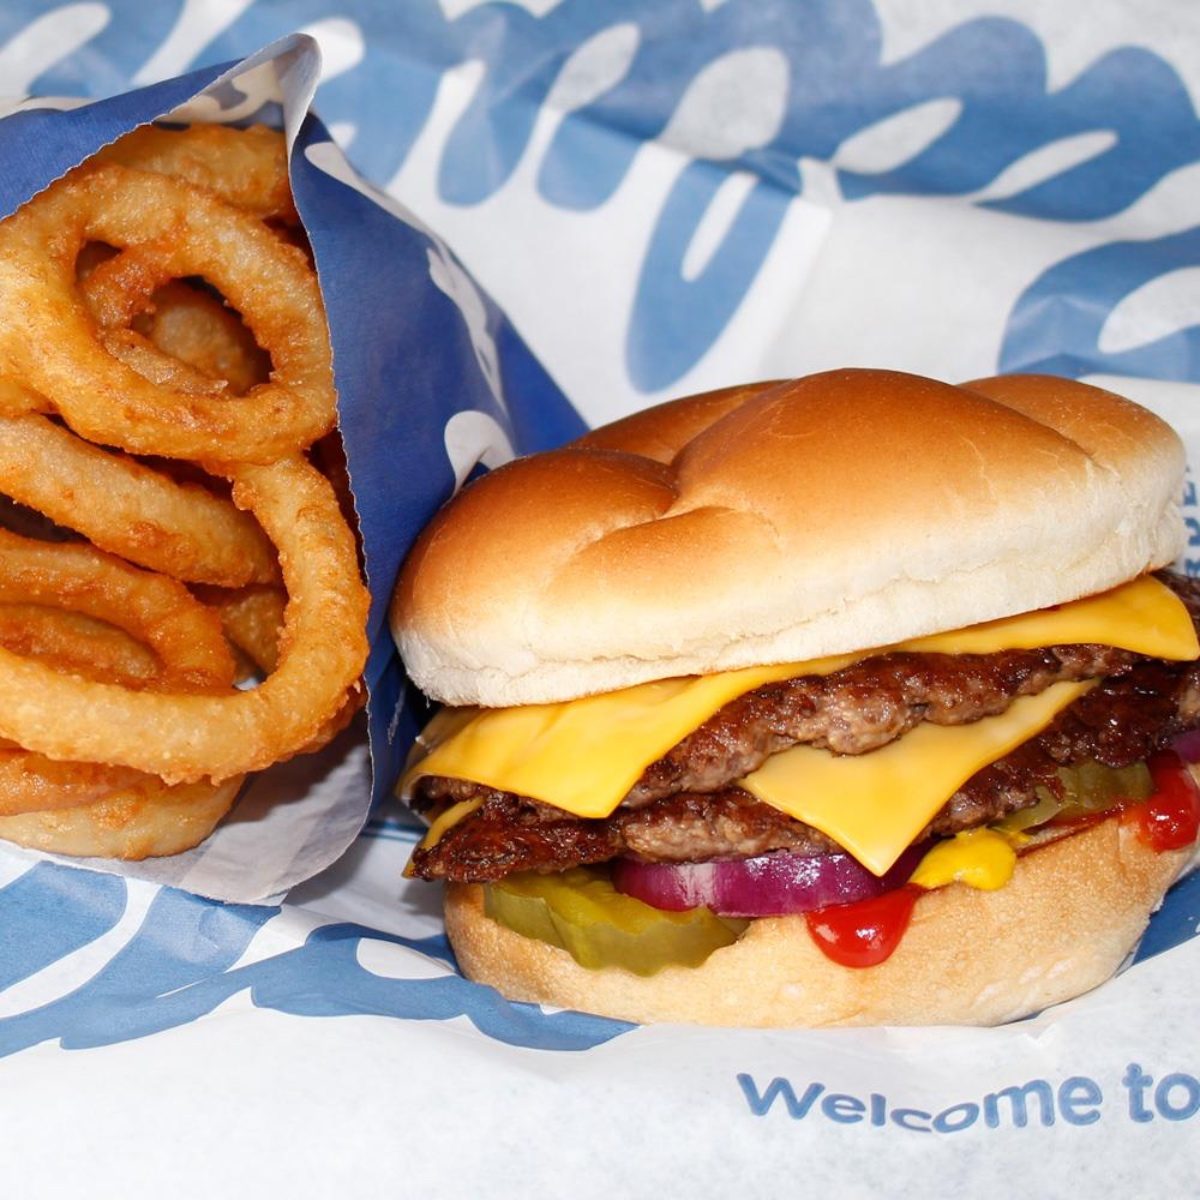 Culver's burger and onion rings